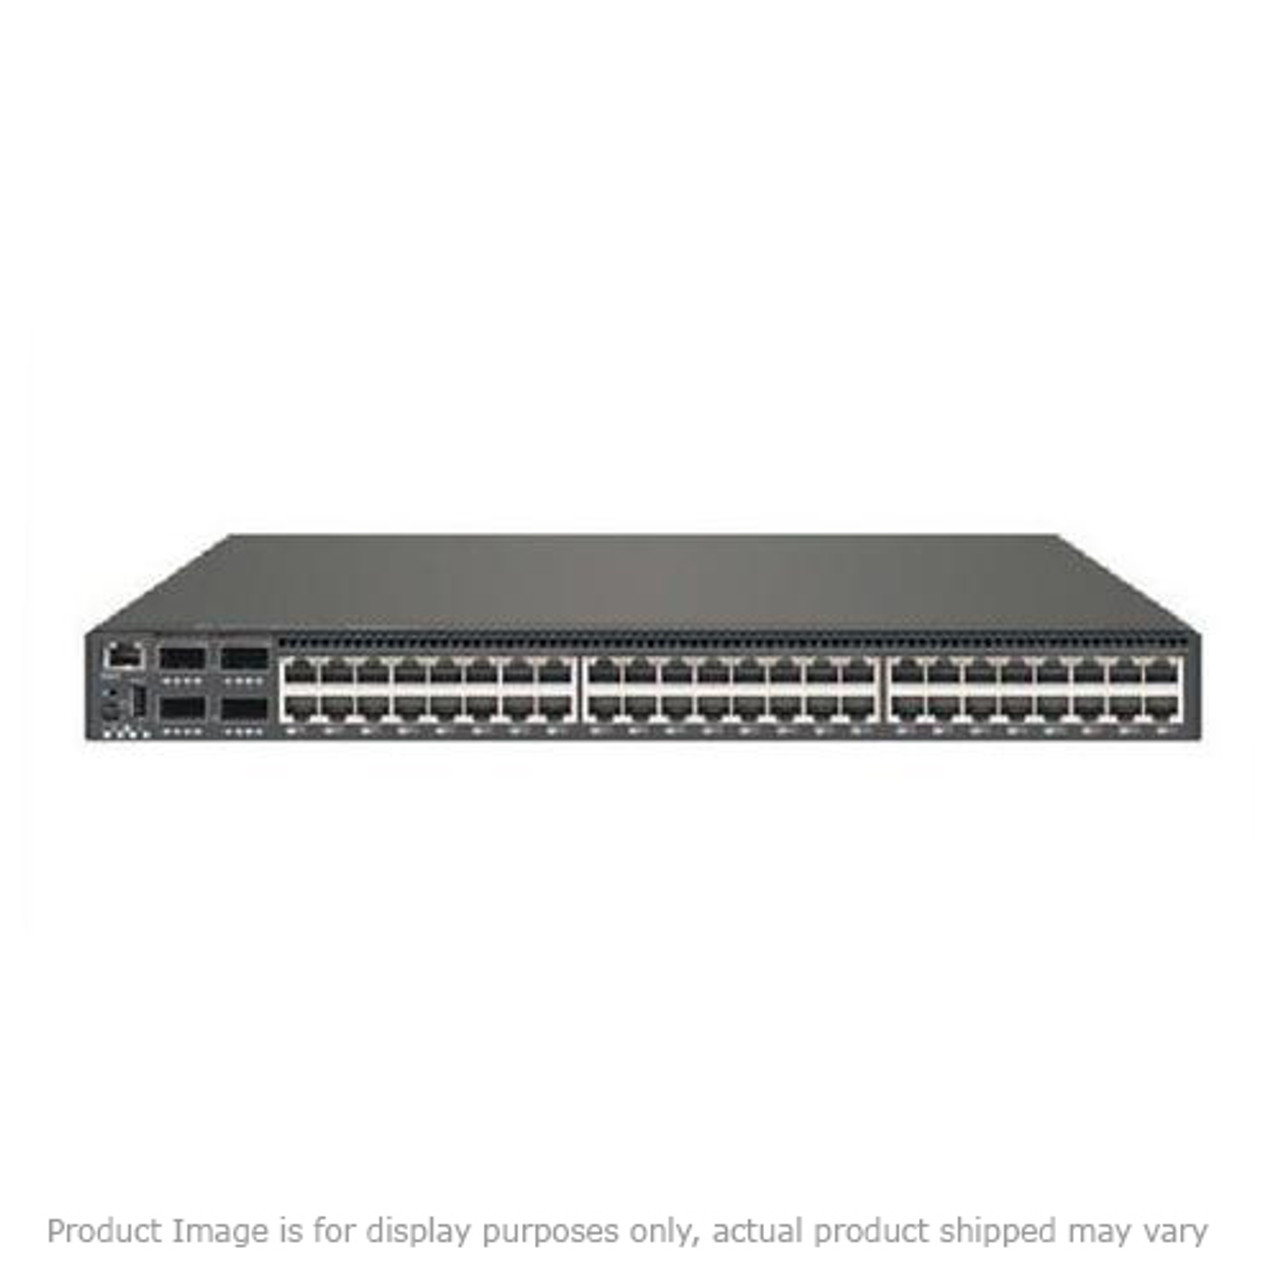 8000-48-5802 Cisco Catalist 2948g Switch 48x 10/100tx Ports and 2x 1000x Gbic Slots (Refurbished)